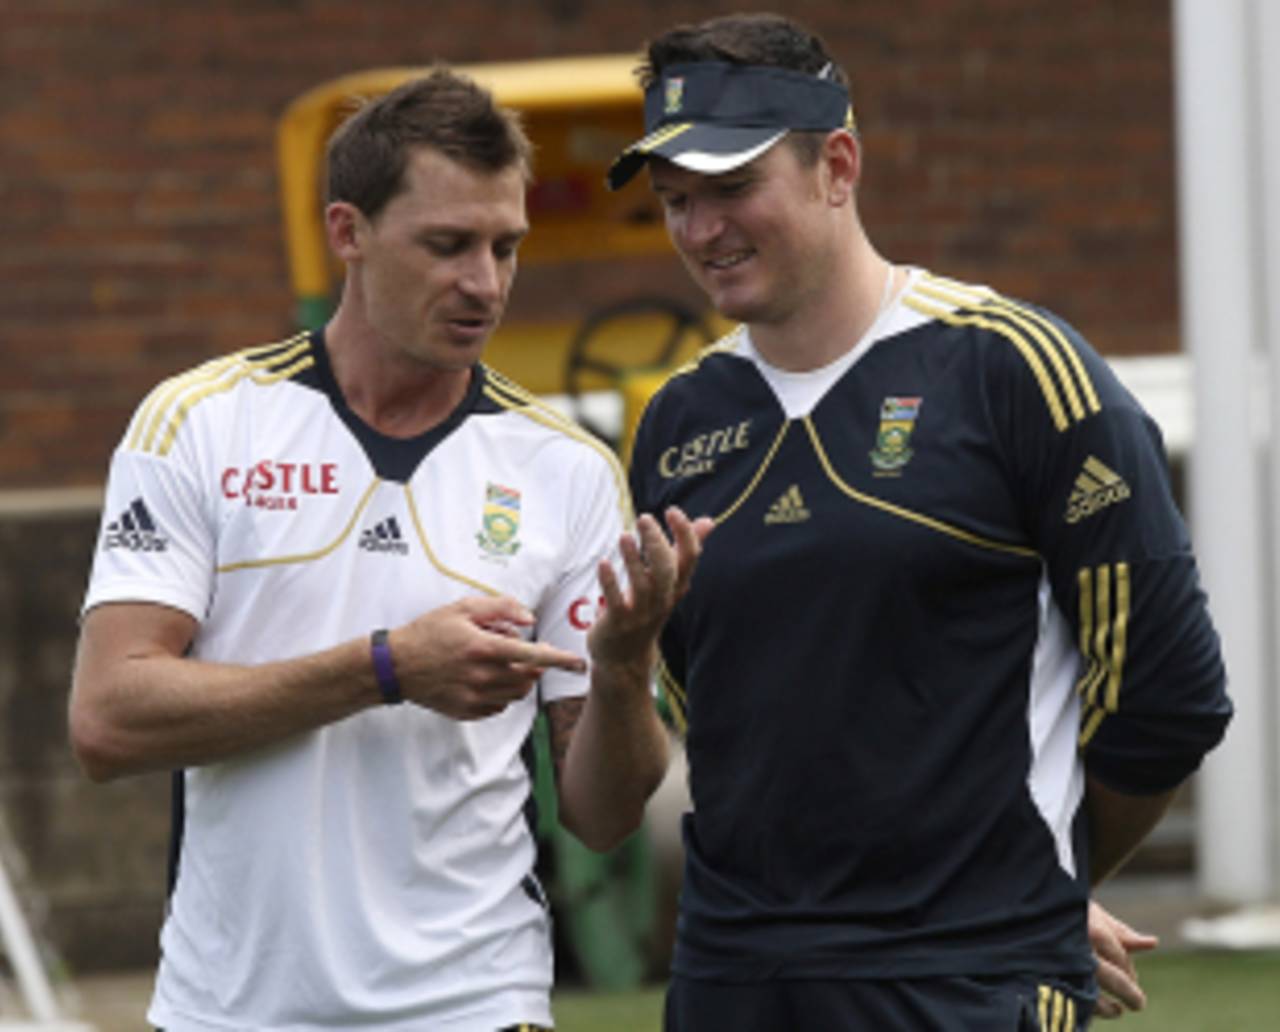 Graeme Smith and Dale Steyn chat at practice, Sydney, October 30, 2012